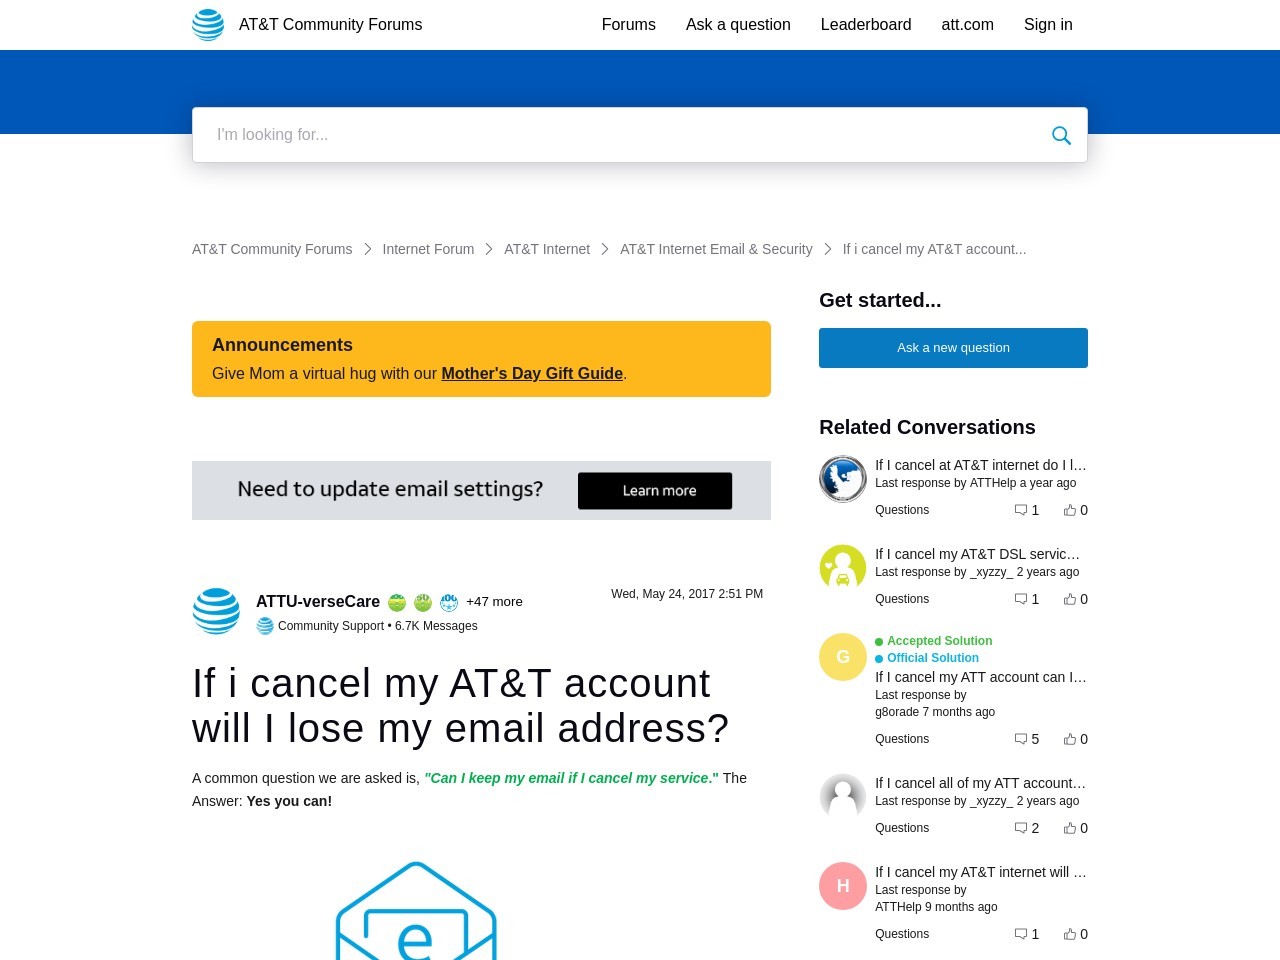 If i cancel my AT&T account will I lose my email address ...